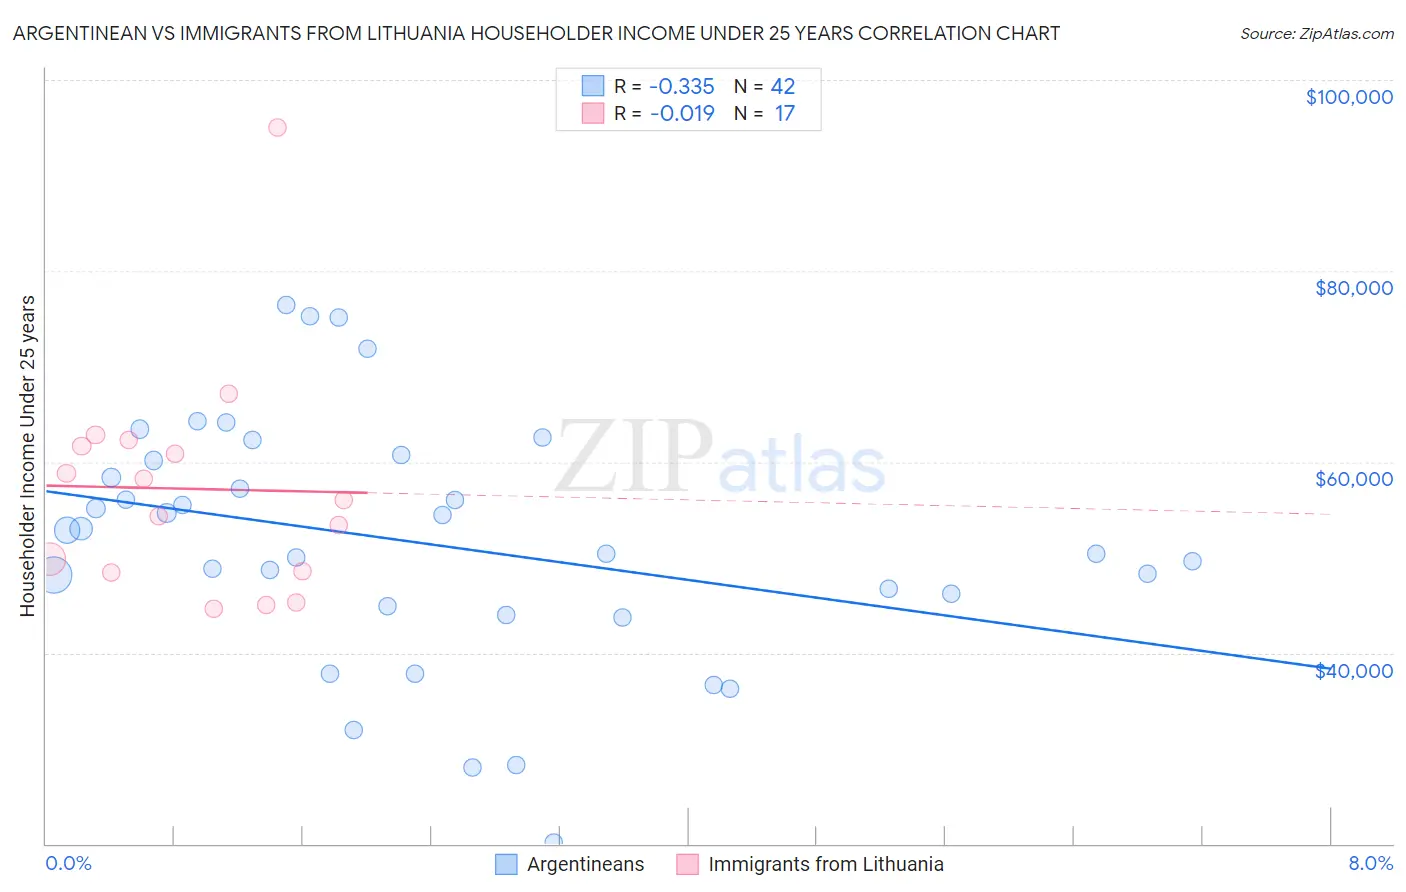 Argentinean vs Immigrants from Lithuania Householder Income Under 25 years